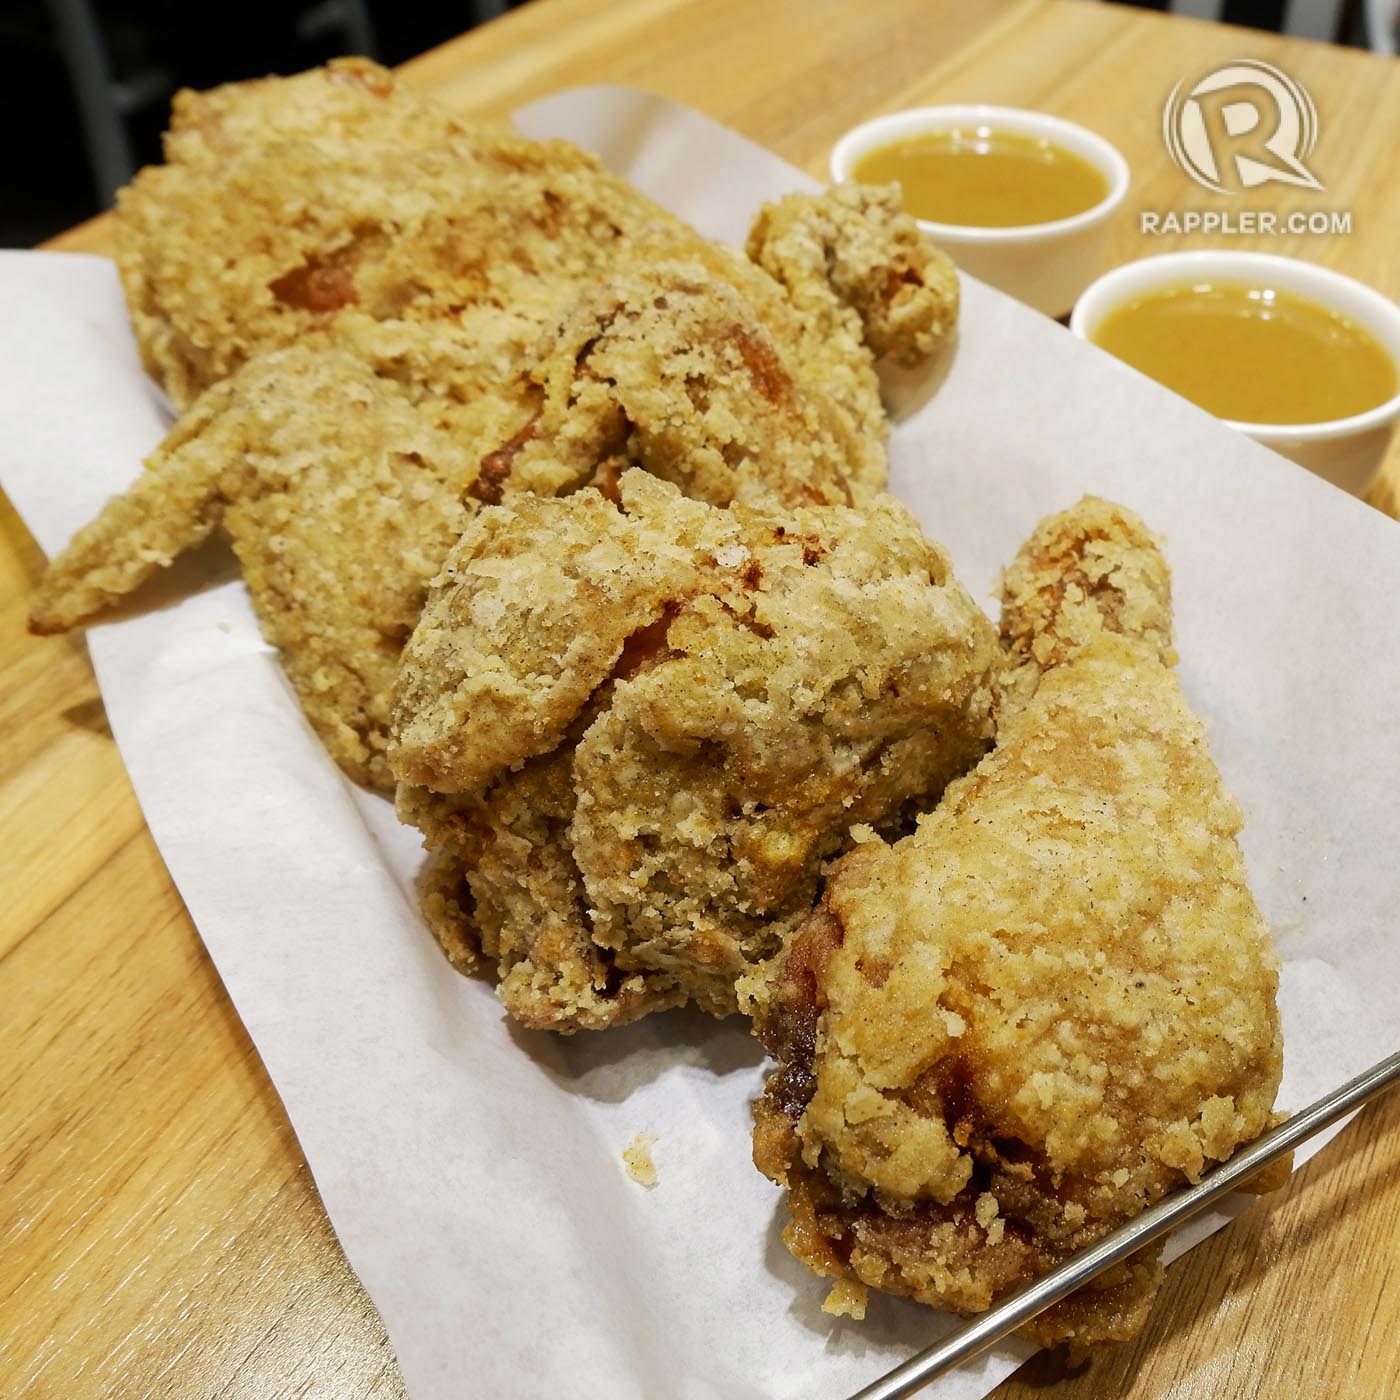 OOH-MAMI. Japanese umami-style fried chicken served with house gravy. 